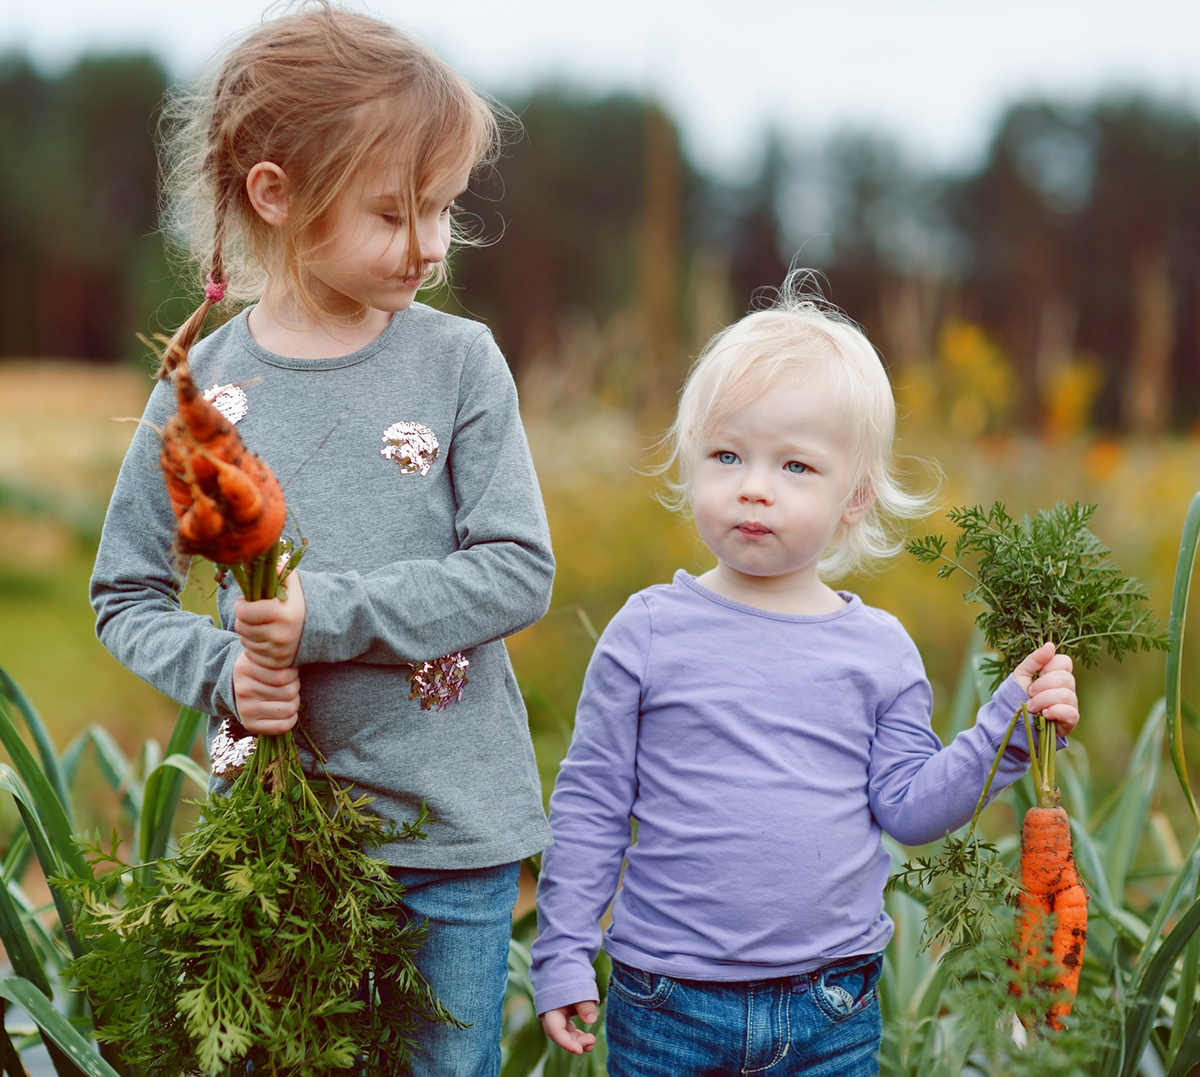 Baby and toddler holding carrots.